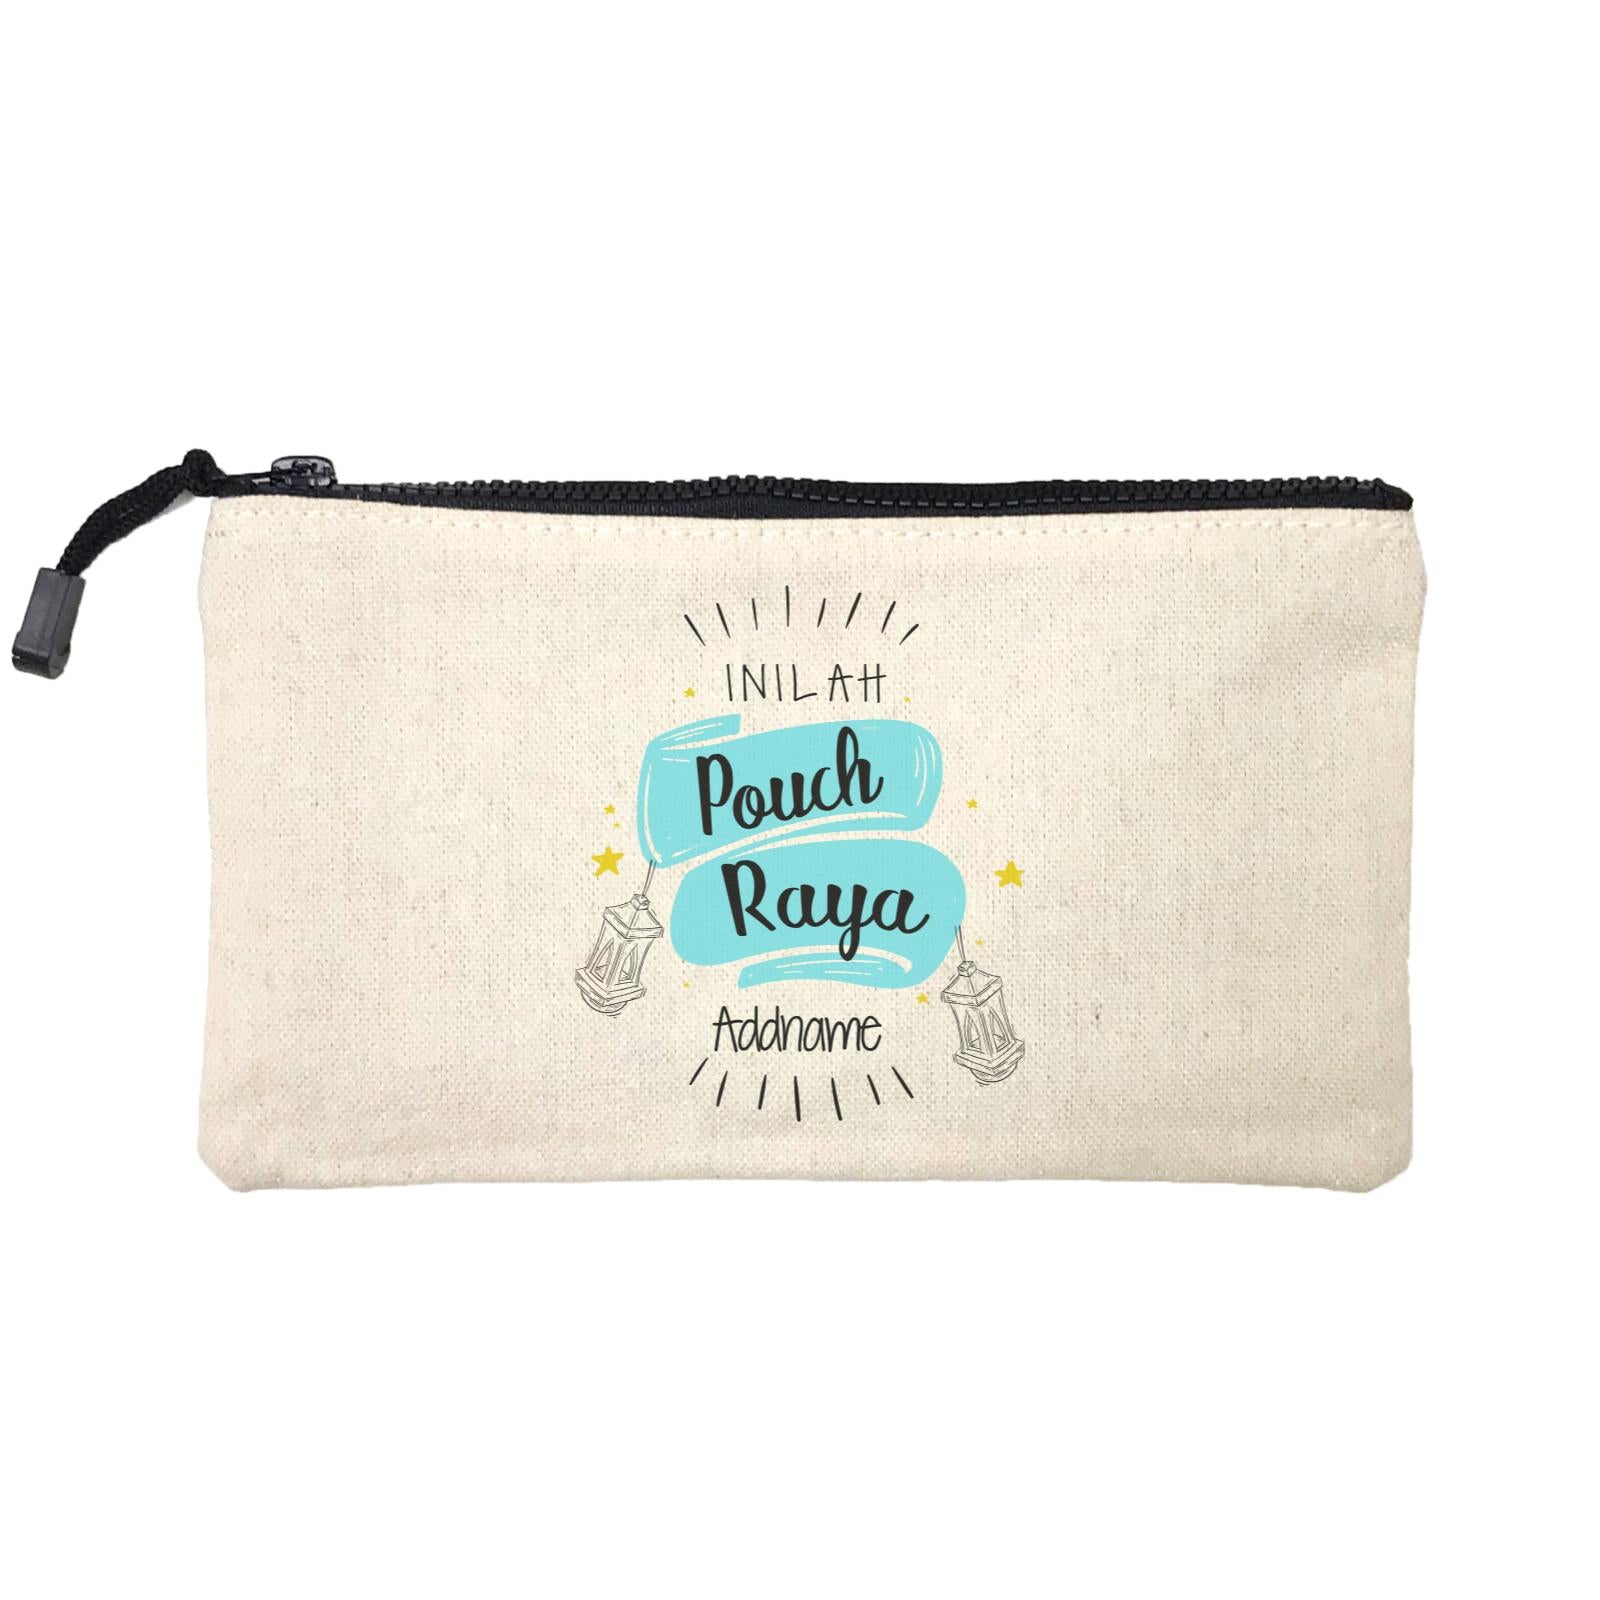 Raya Banner Inilah Pouch Raya Addname Mini Accessories Stationery Pouch